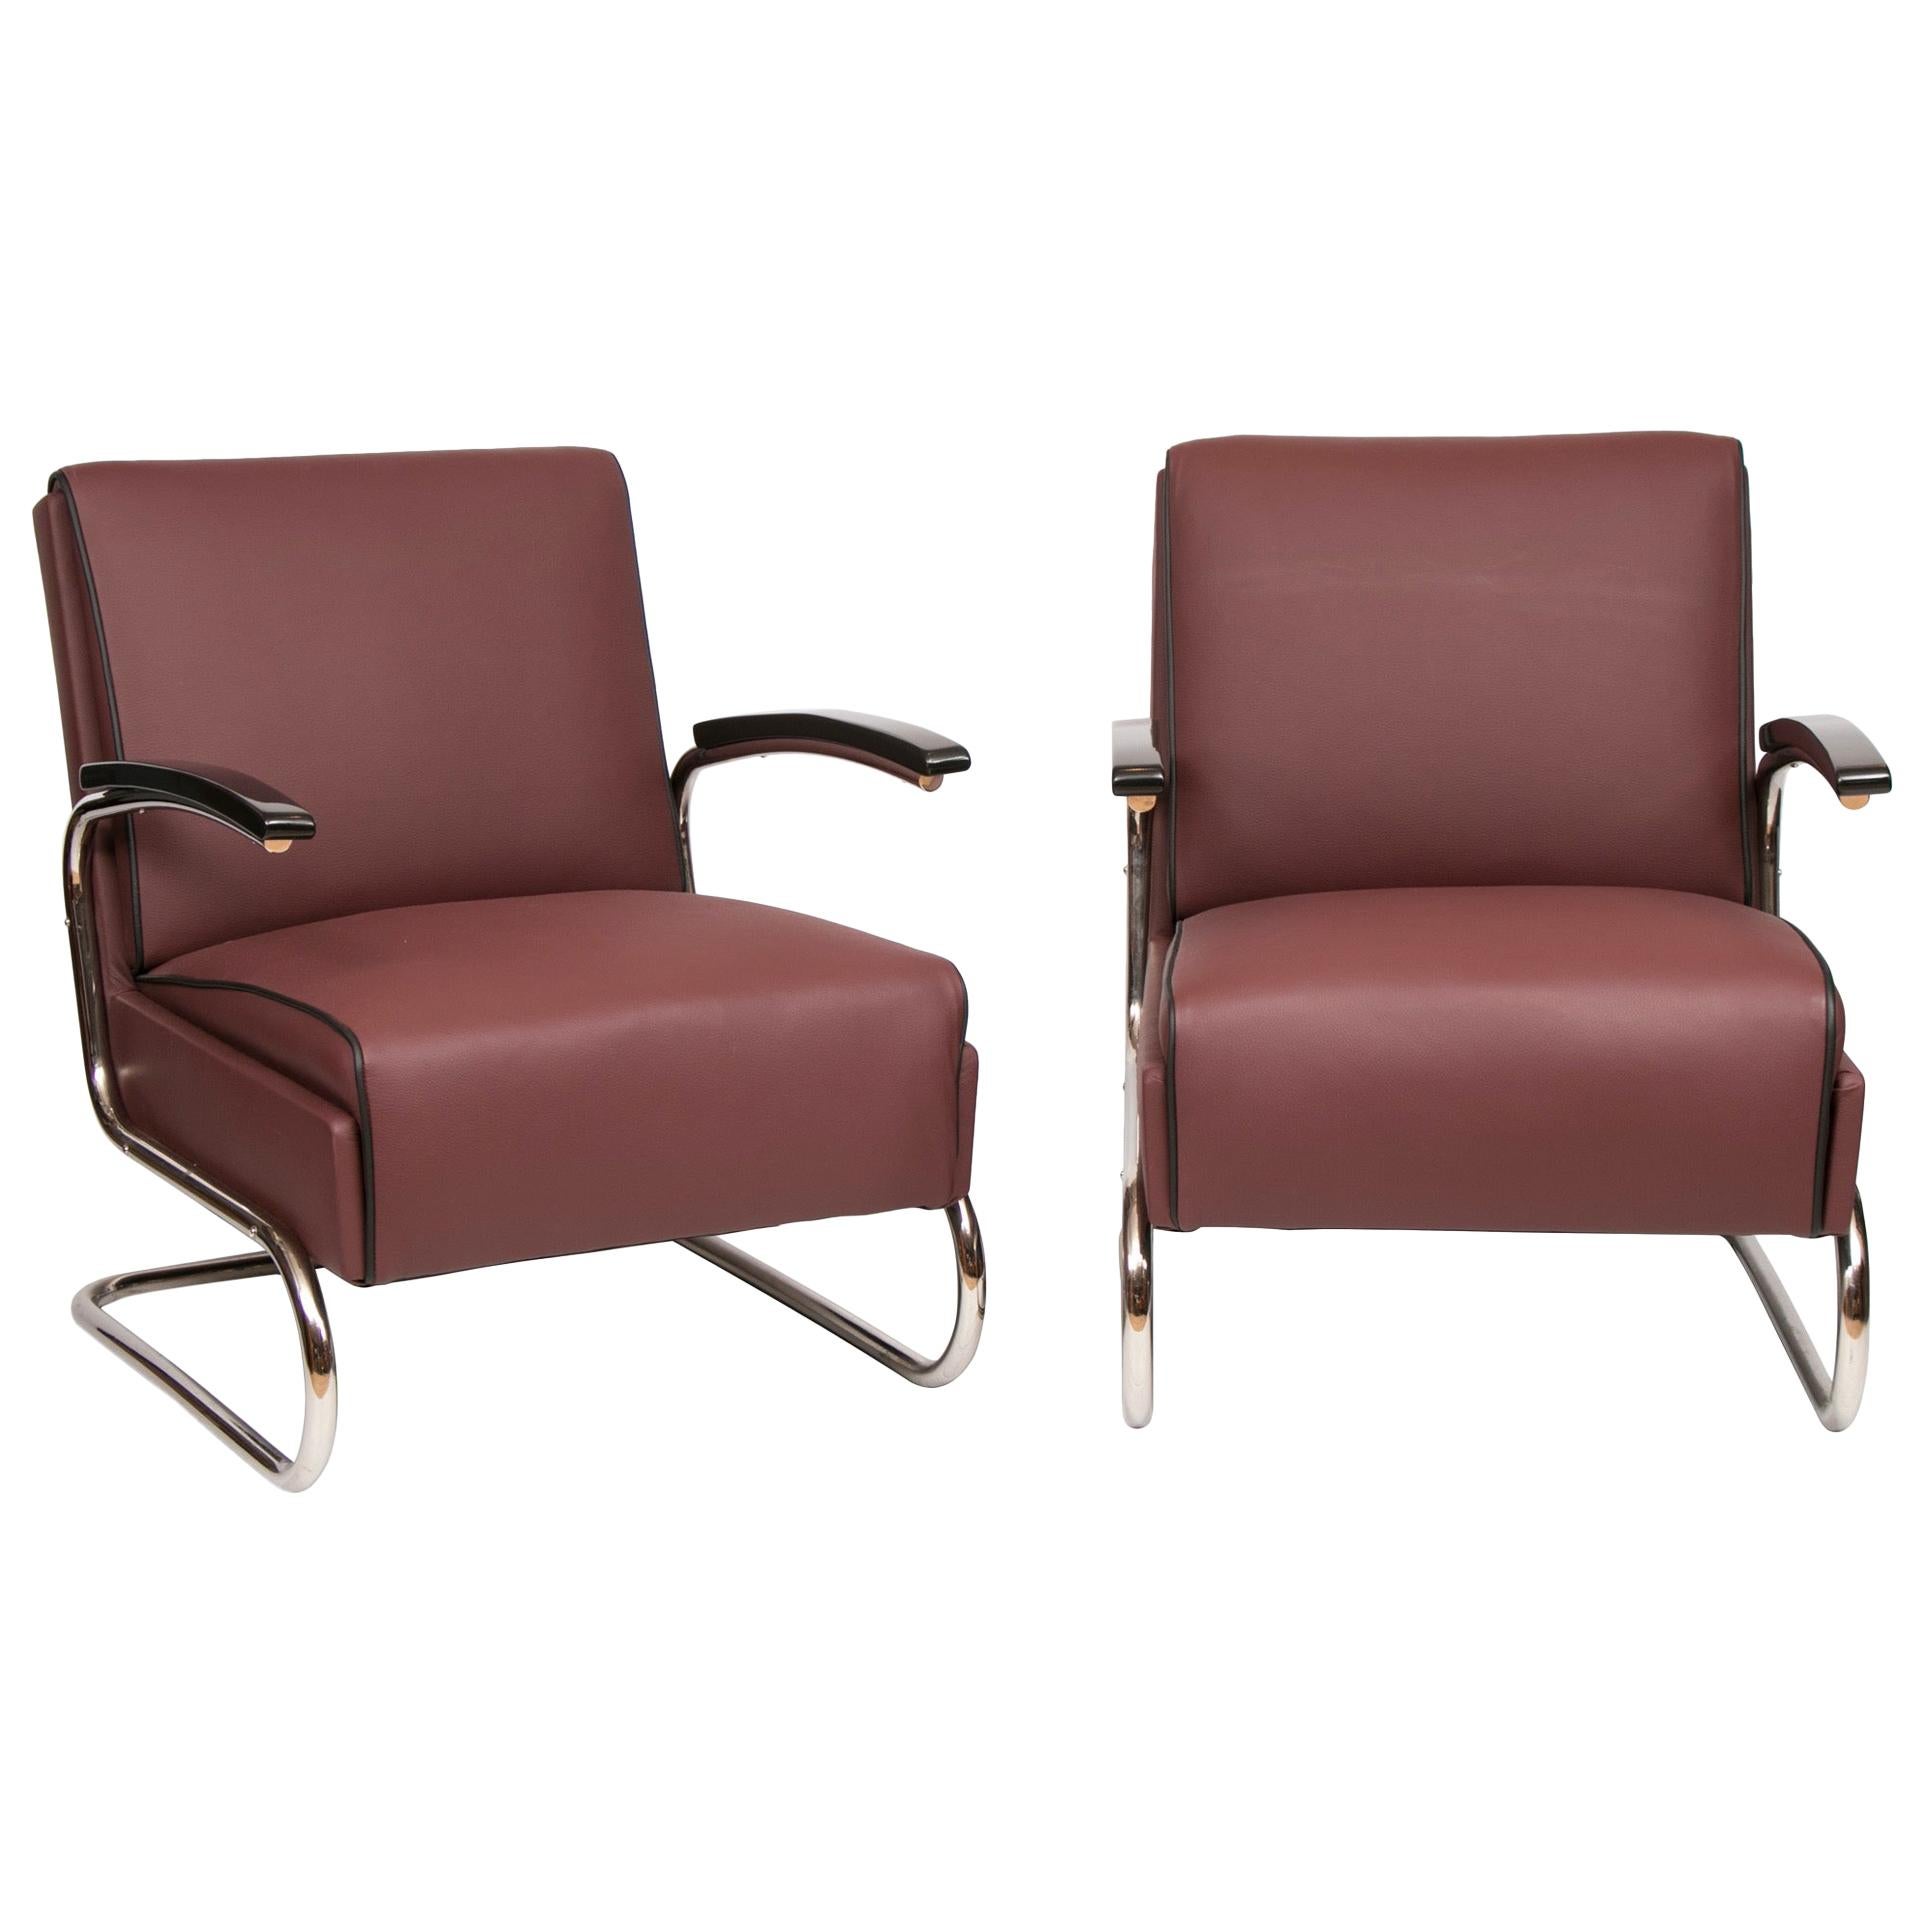 Pair of Thonet Art Deco Armchairs Bauhaus Design with Polished Cantilever Frames For Sale